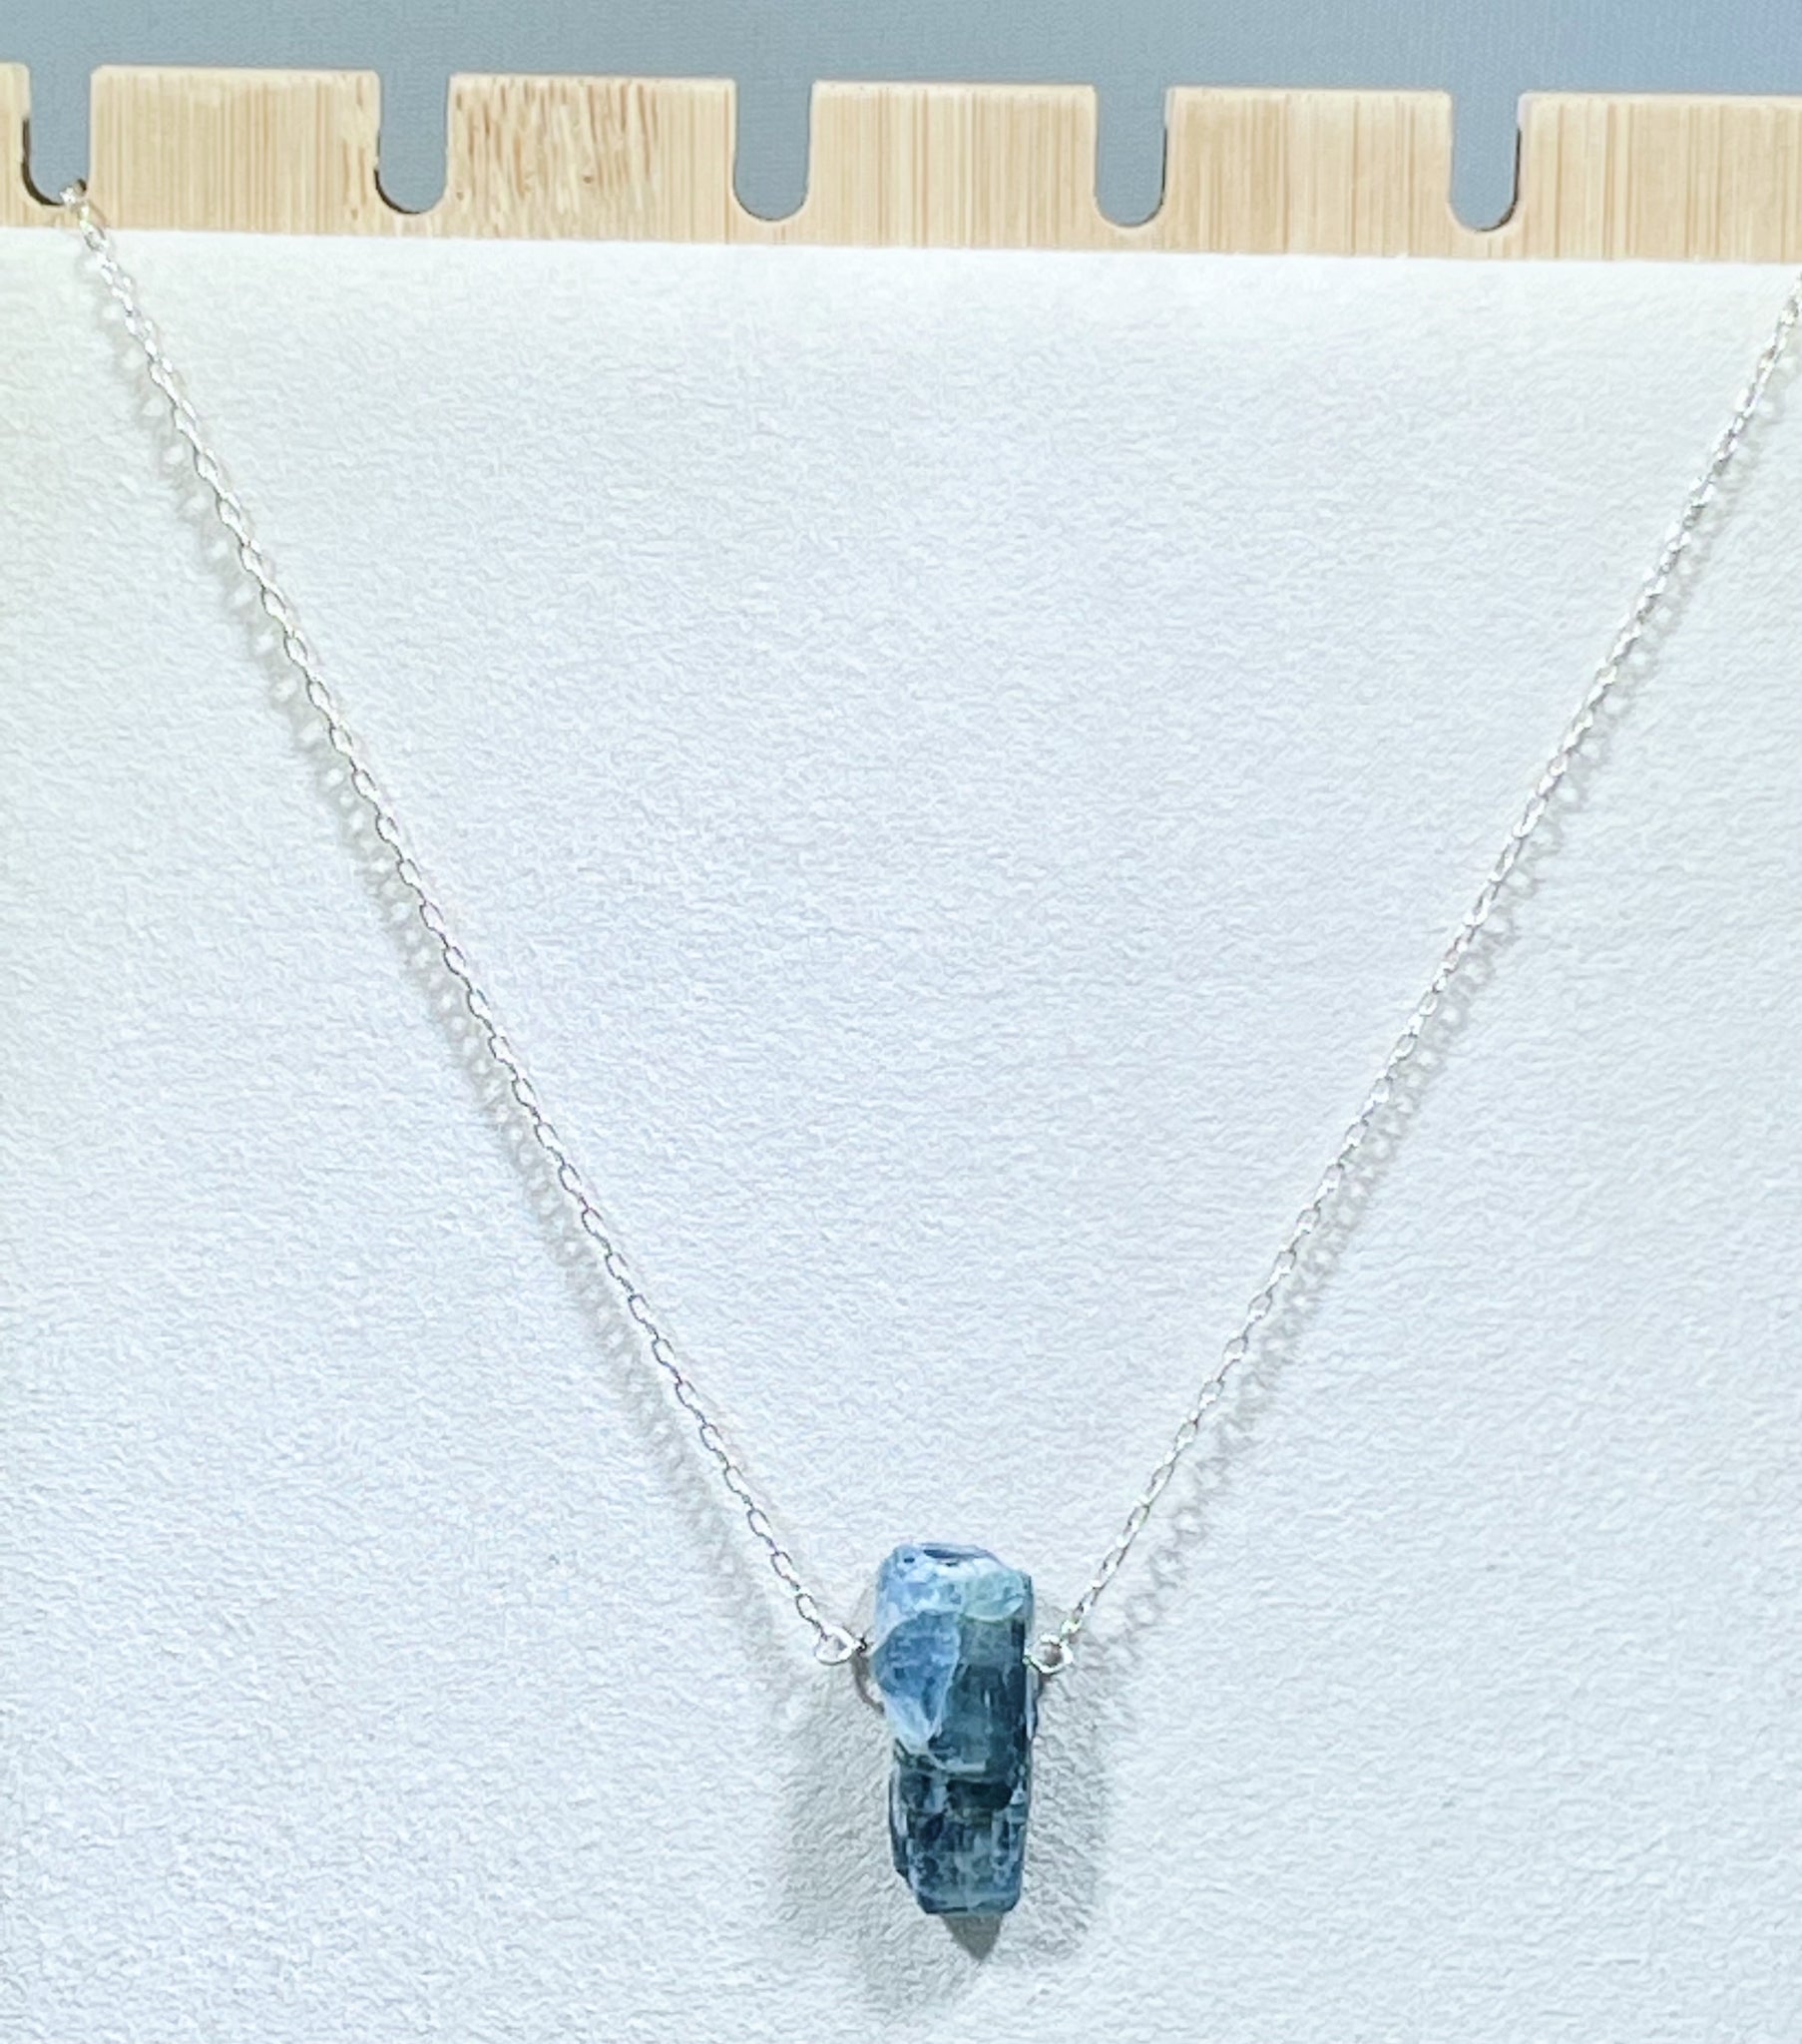 Kyanite Pendant Necklace with Sterling Silver